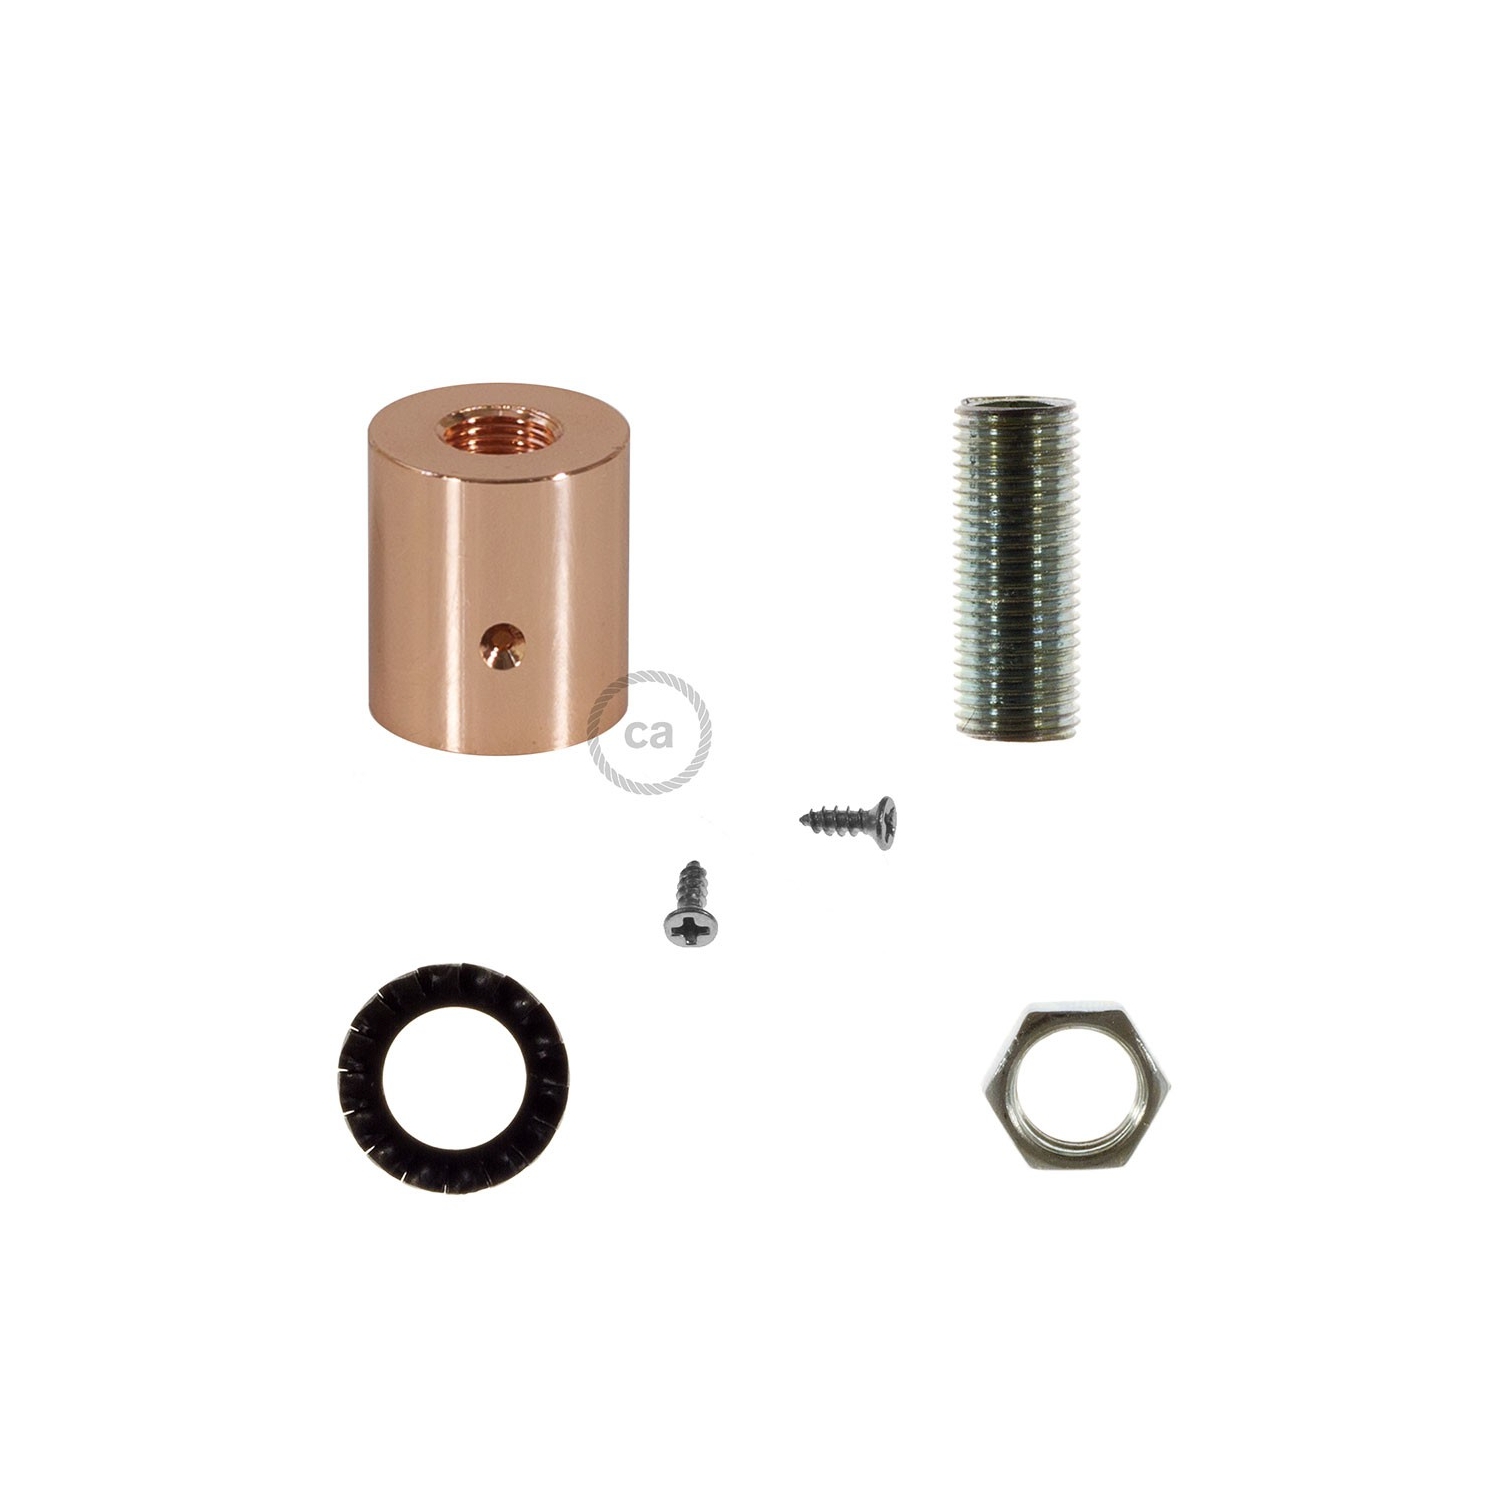 Copper metal cable terminal for 16 mm Creative-Tube, accessories included